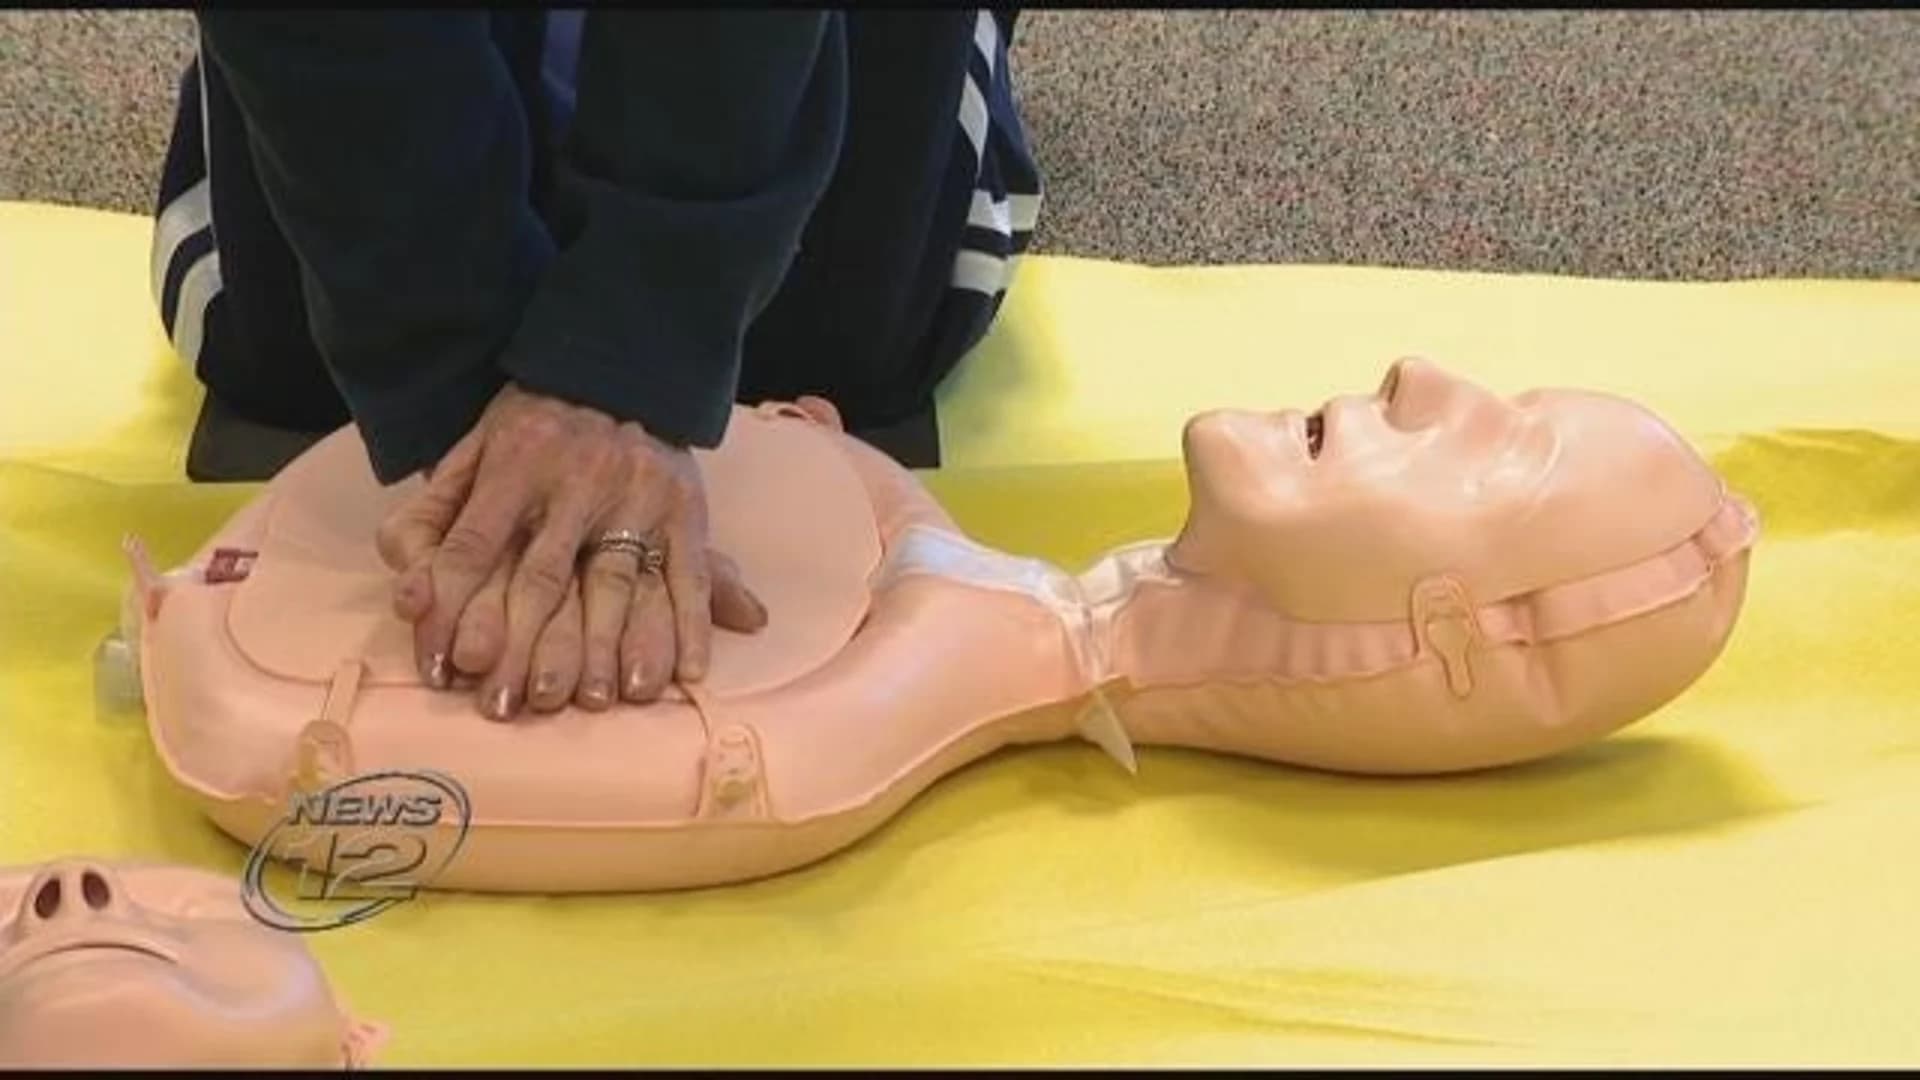 Suffolk offers free CPR classes for teens and adults